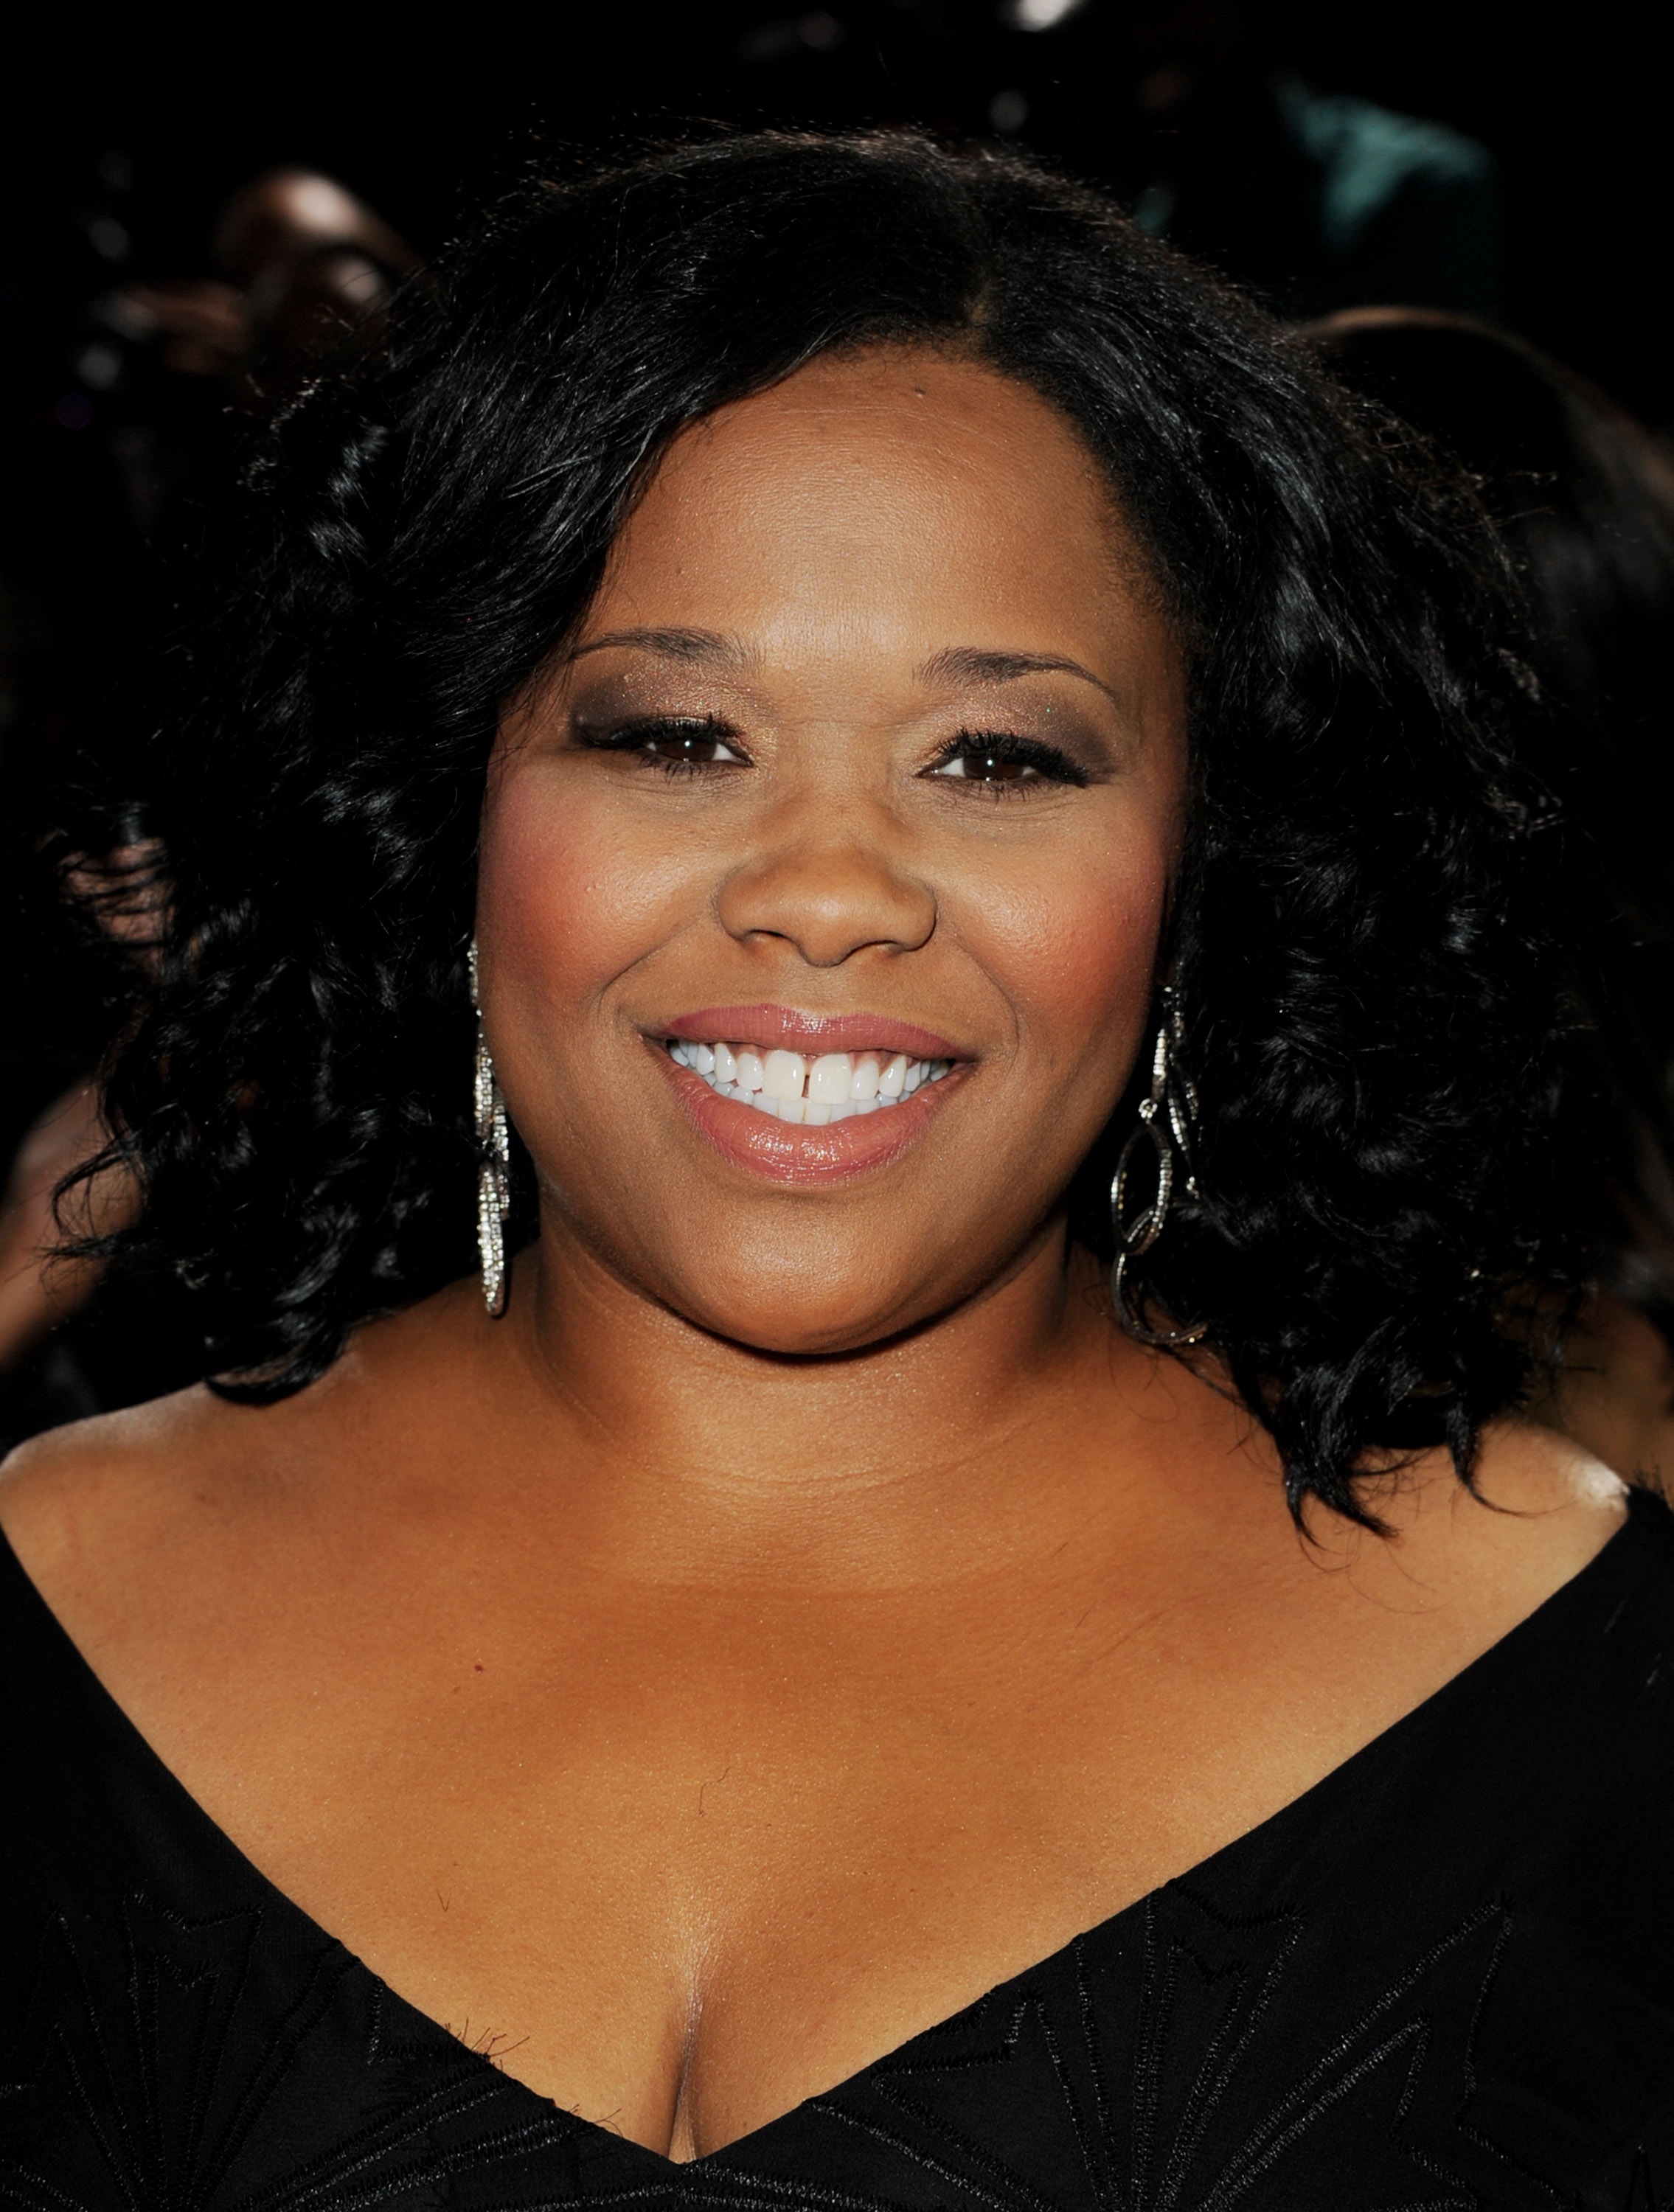 Natalie Desselle-Reid at a screening of Lionsgate Films' "Tyler Perry's Madea's Big Happy Family" at the Cinerama Dome Theater on April 19, 2011 in Los Angeles, California.